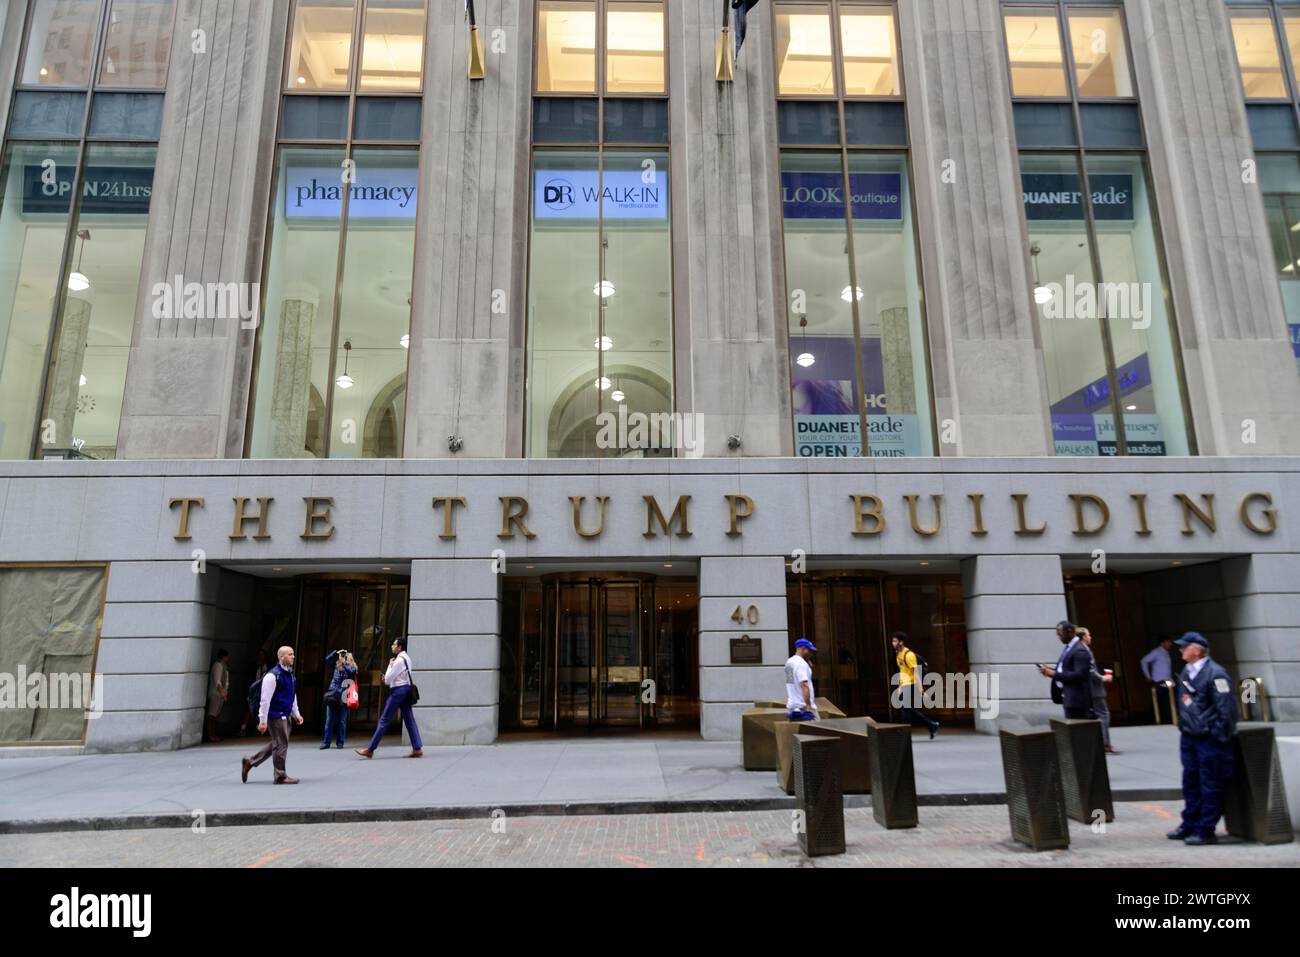 Entrance of The Trump Building with names on the facade and passers-by in front of it, Manhattan, New York City, New York, USA, North America Stock Photo